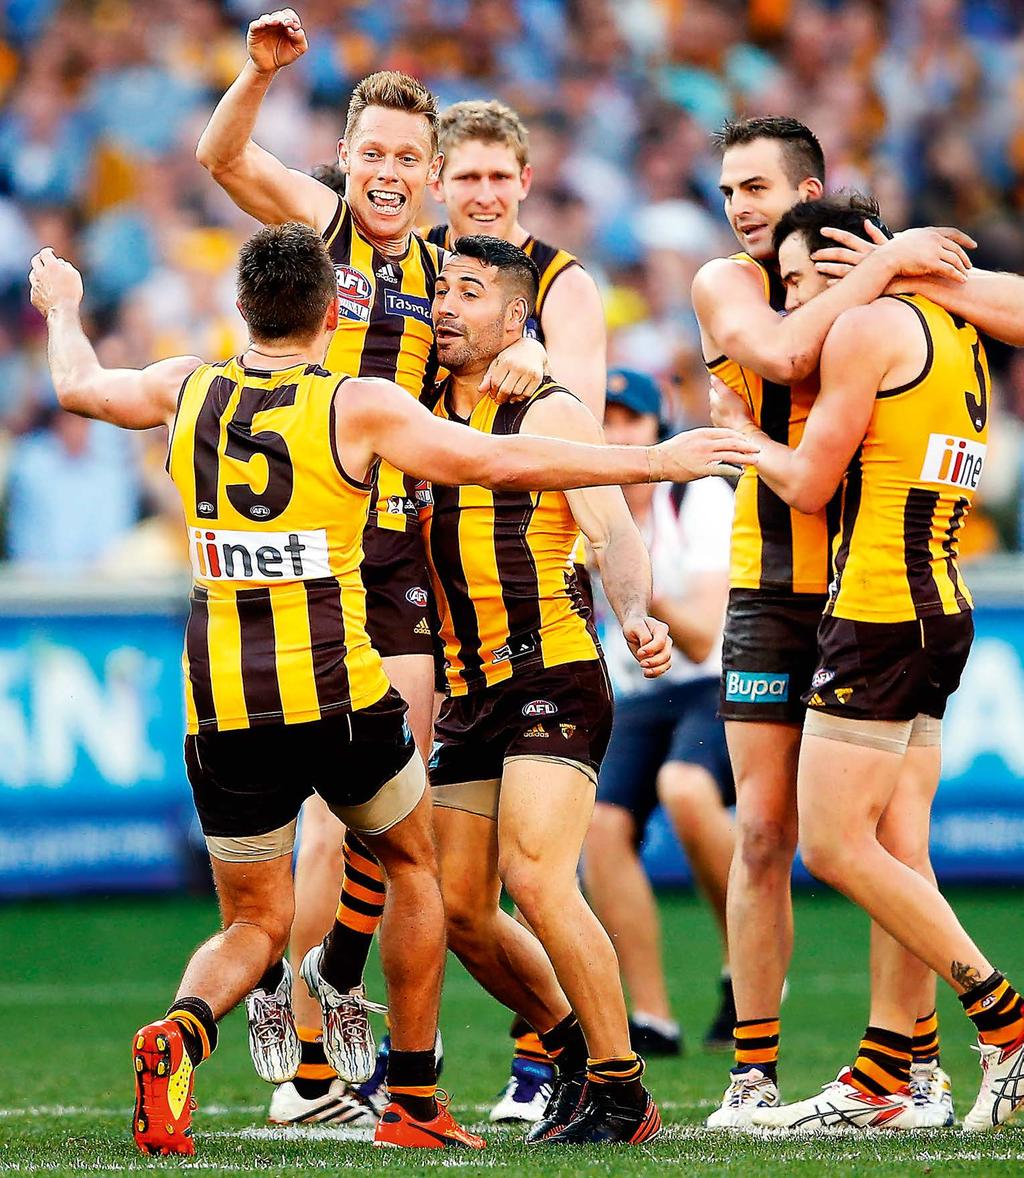 140 AFL ANNUAL REPORT 2014 AWARDS, RESULTS & FAREWELLS 141 AWARDS, RESULTS & FAREWELLS Hawthorn capped off a remarkable season on the field, winning its 12th premiership, while the AFL farewelled